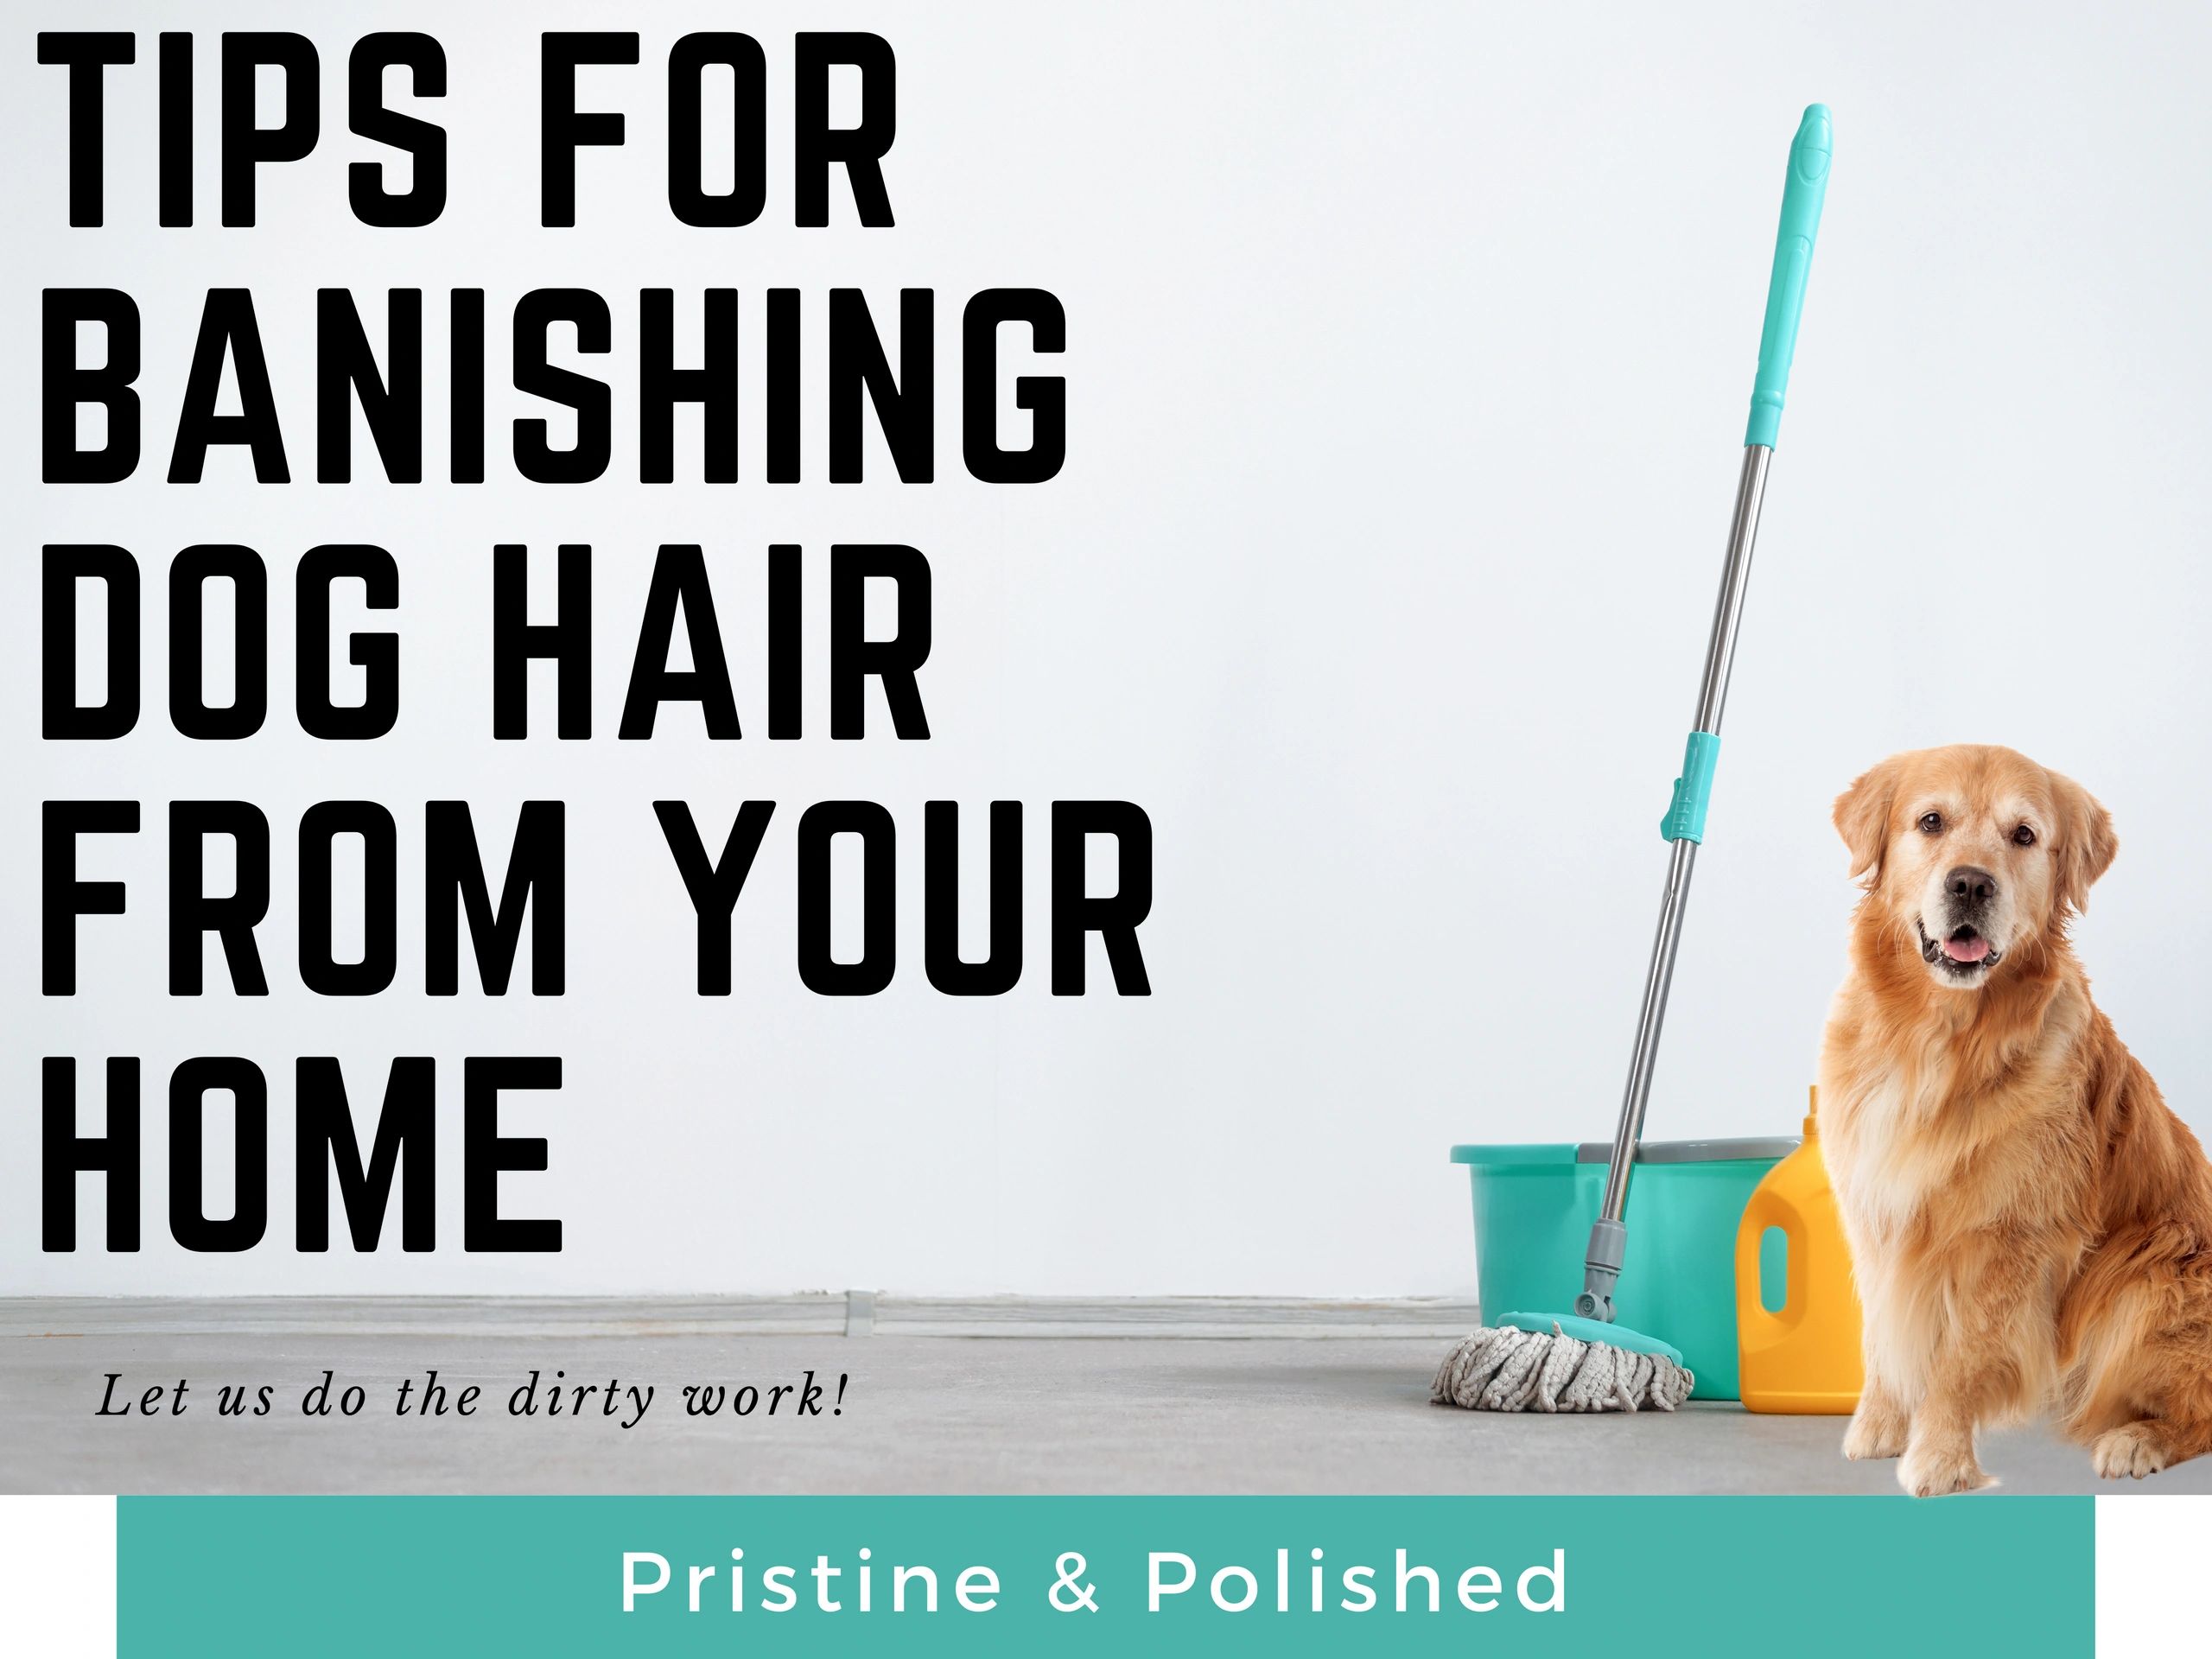 Tips for ridding your home of pet hair